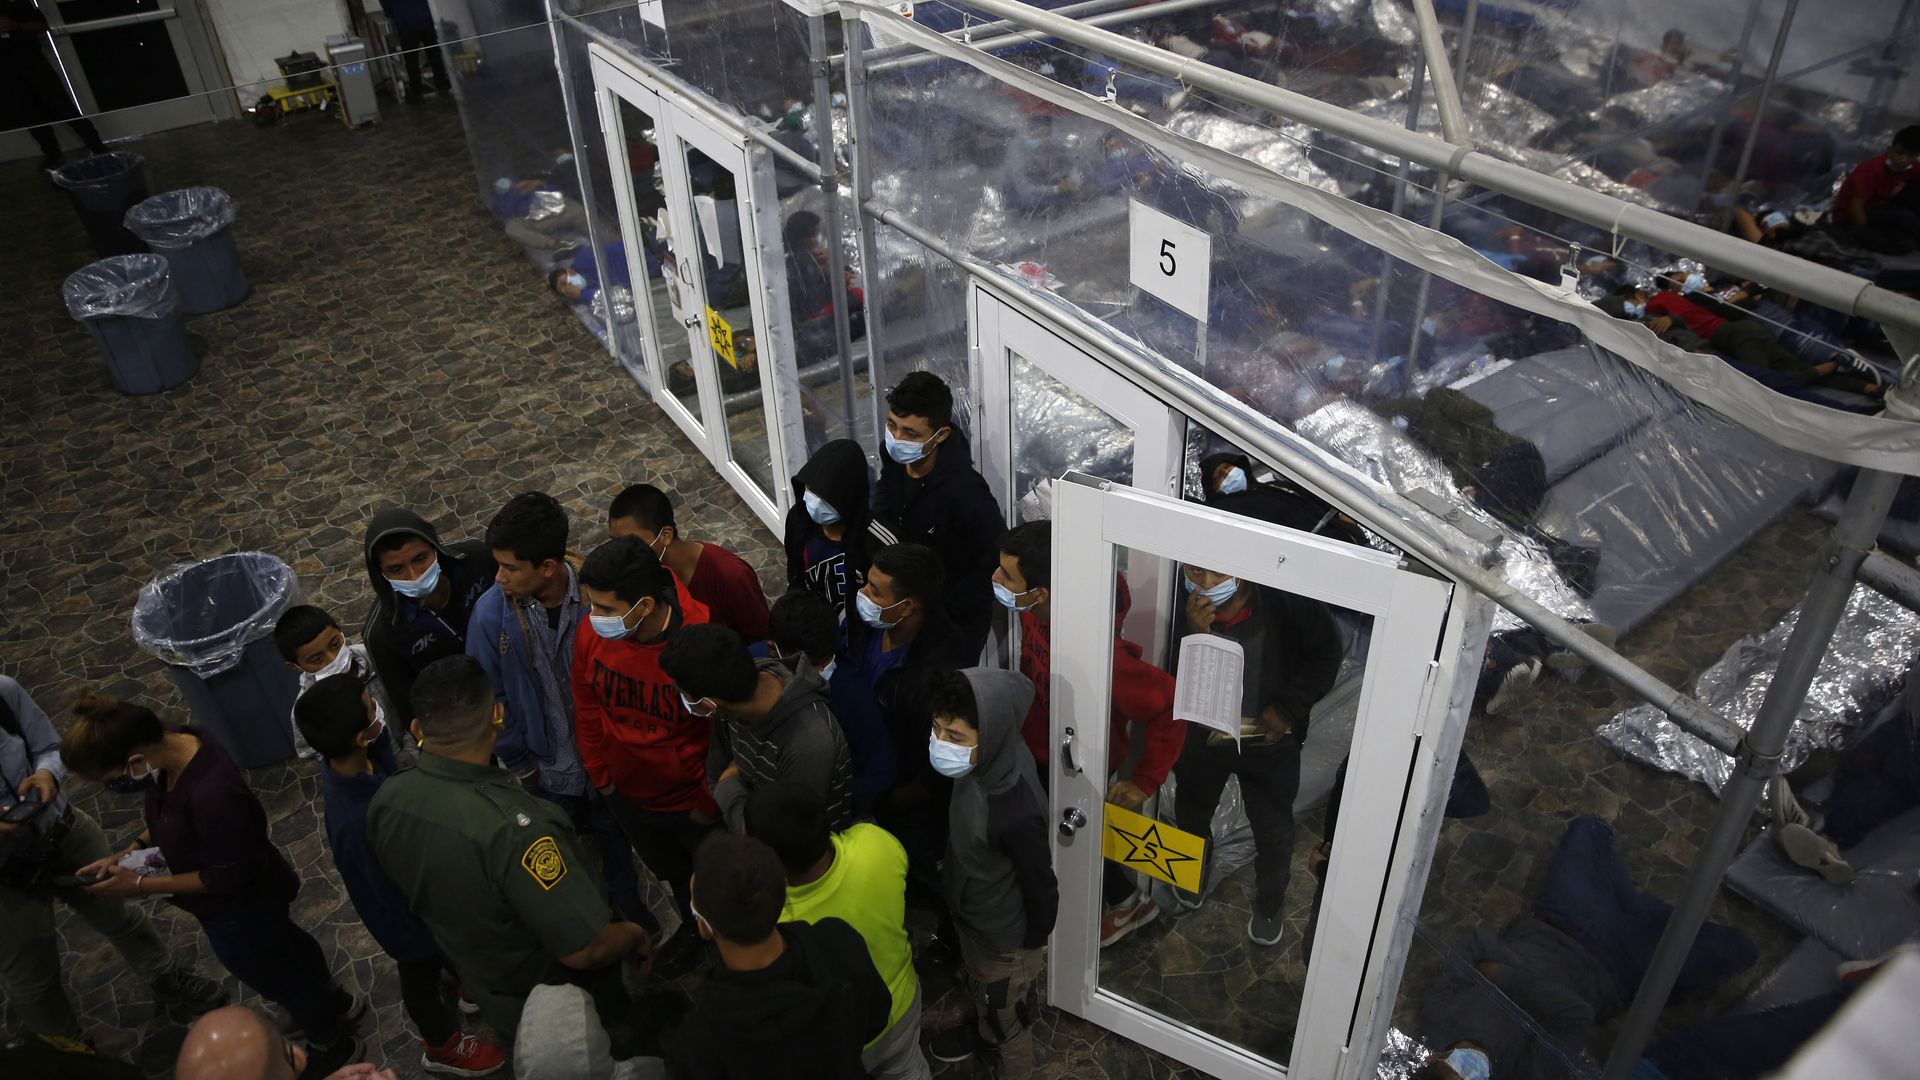 Picture of a a border detention center in Texas